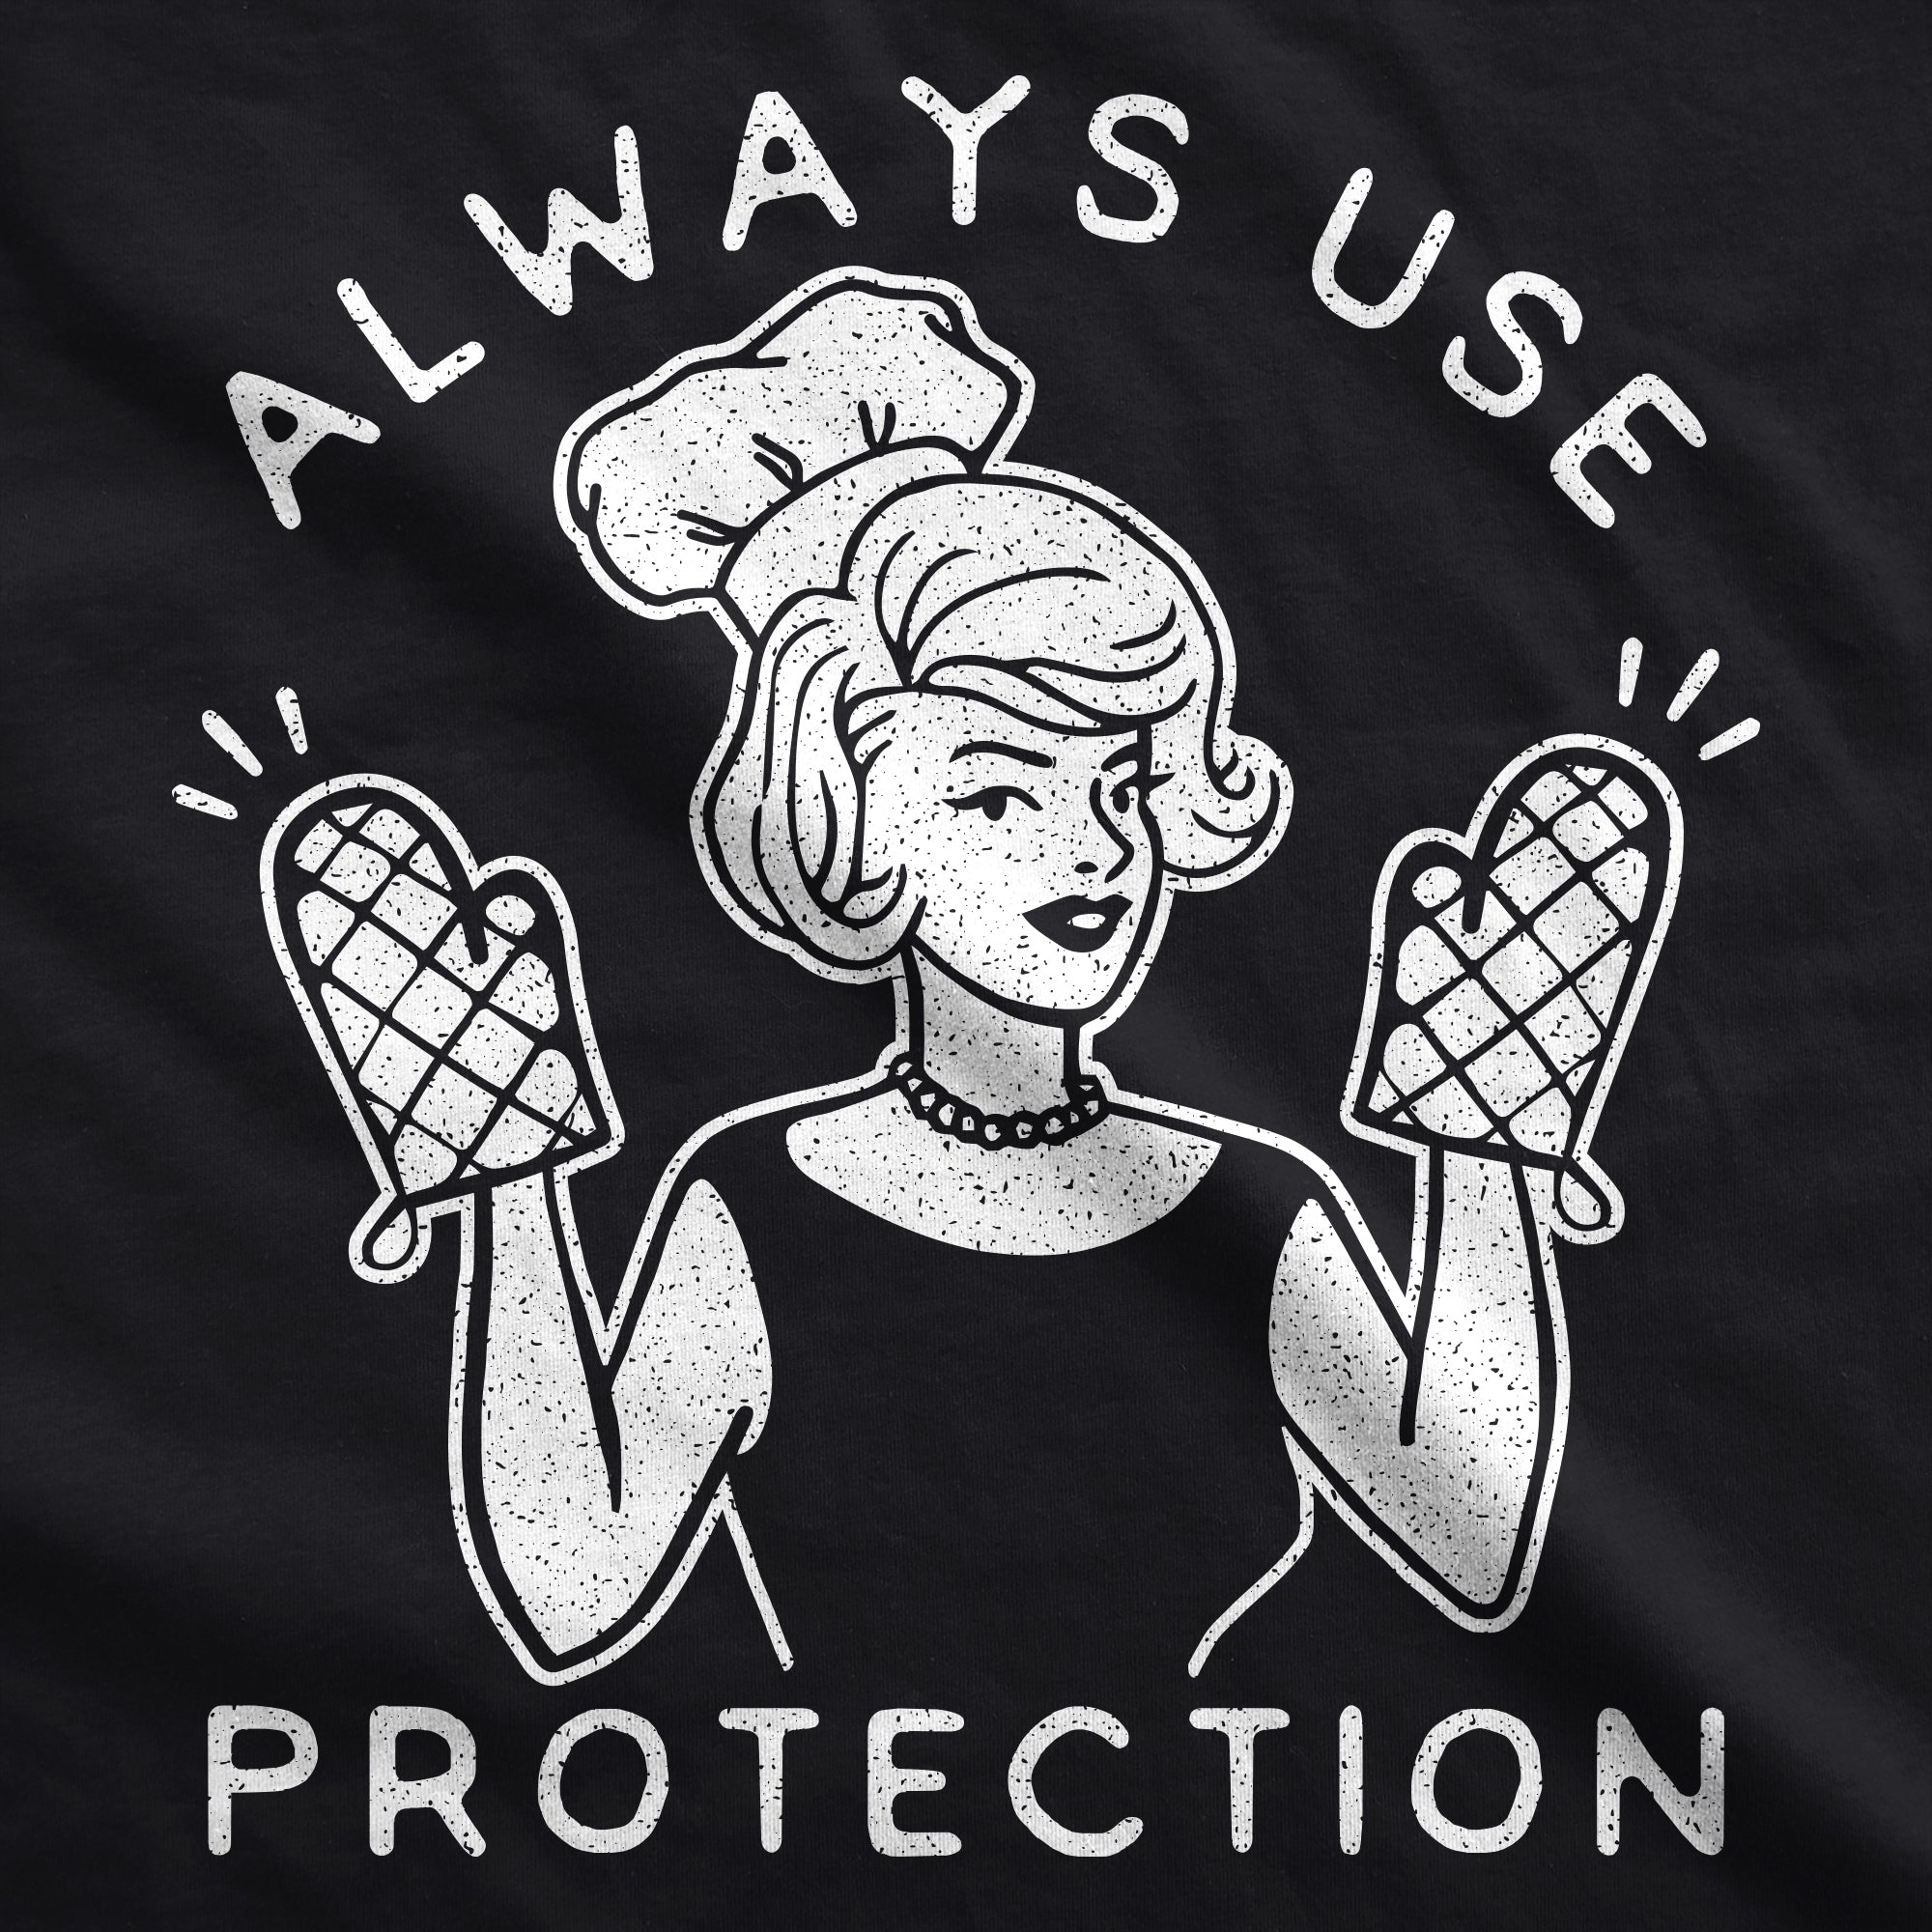 Funny Black Always Use Protection Woman Apron Nerdy Sex Tee